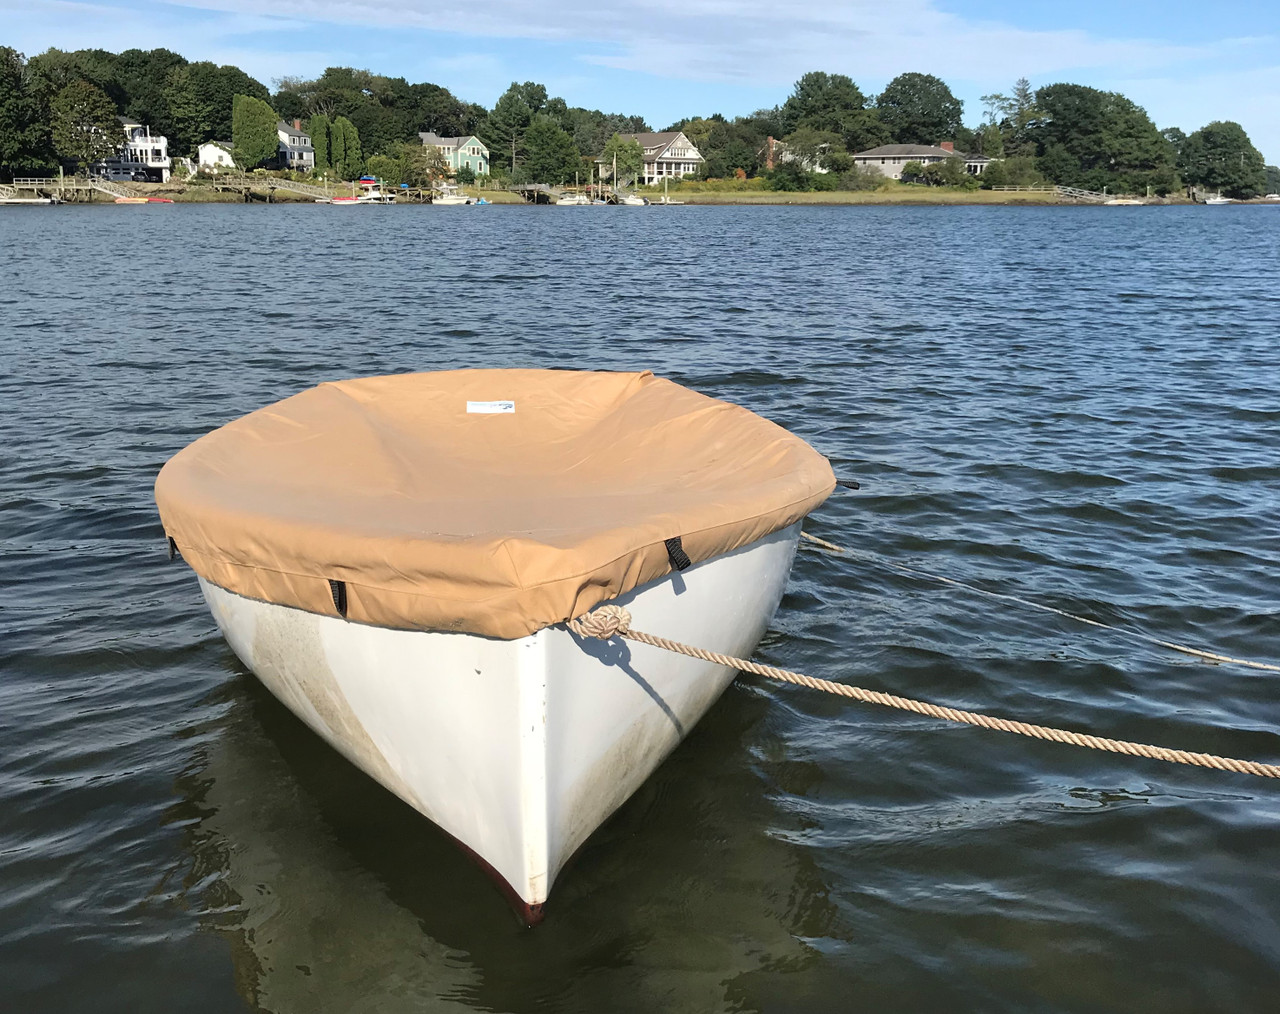 The Top Deck Boat Cover from SLO Sail and Canvas is custom tailored to perfectly fit your Dyer Dink 10 sailboat. 